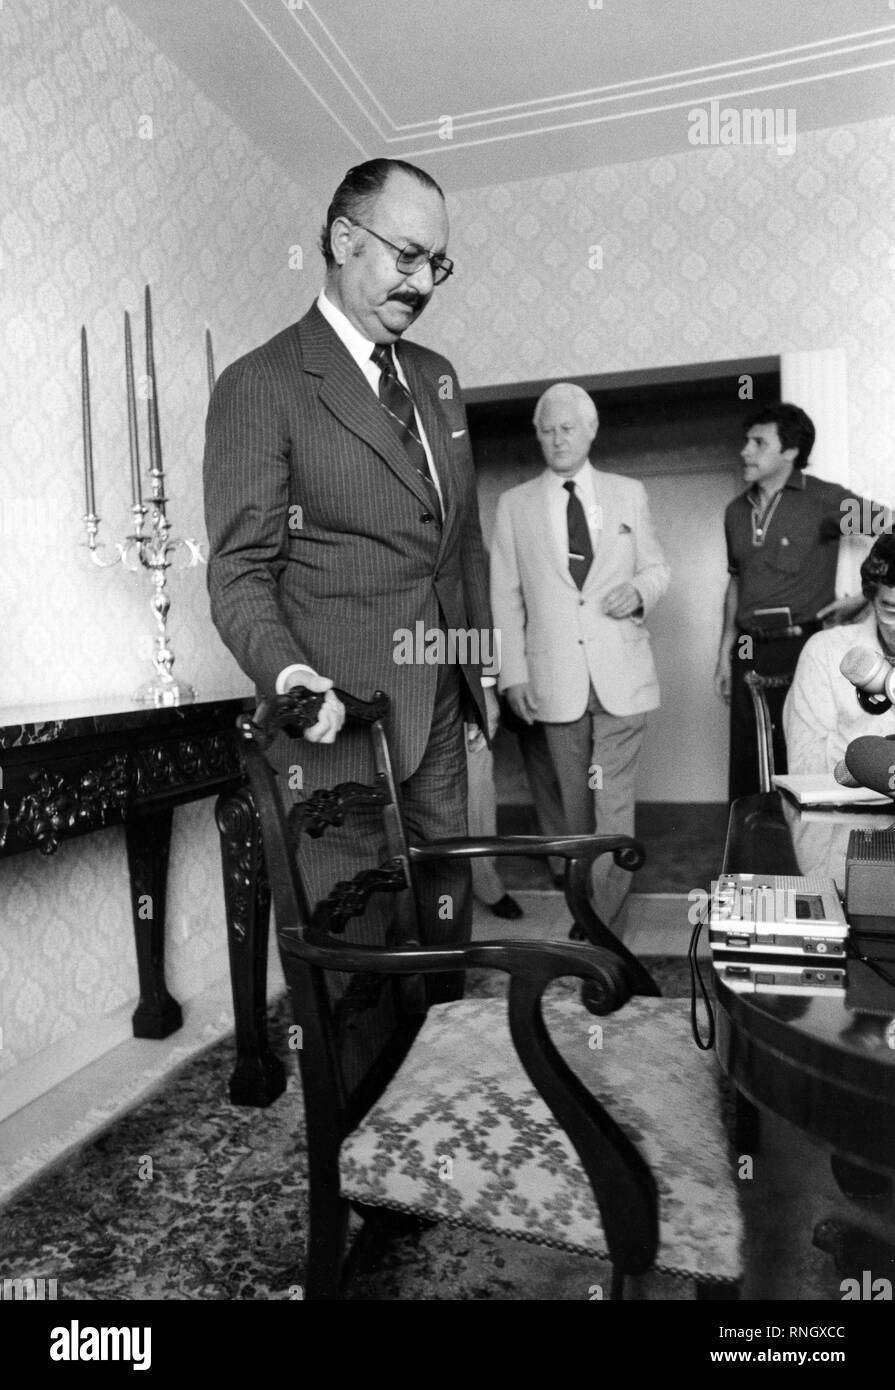 Nicaraguan President Anastasio " Tachito " Somoza Debayle, in exile in Miami, Florida. Somoza was assassinated in Asunción, Paraguay on September 17, 1980 after resigning as president and fleeing to first the